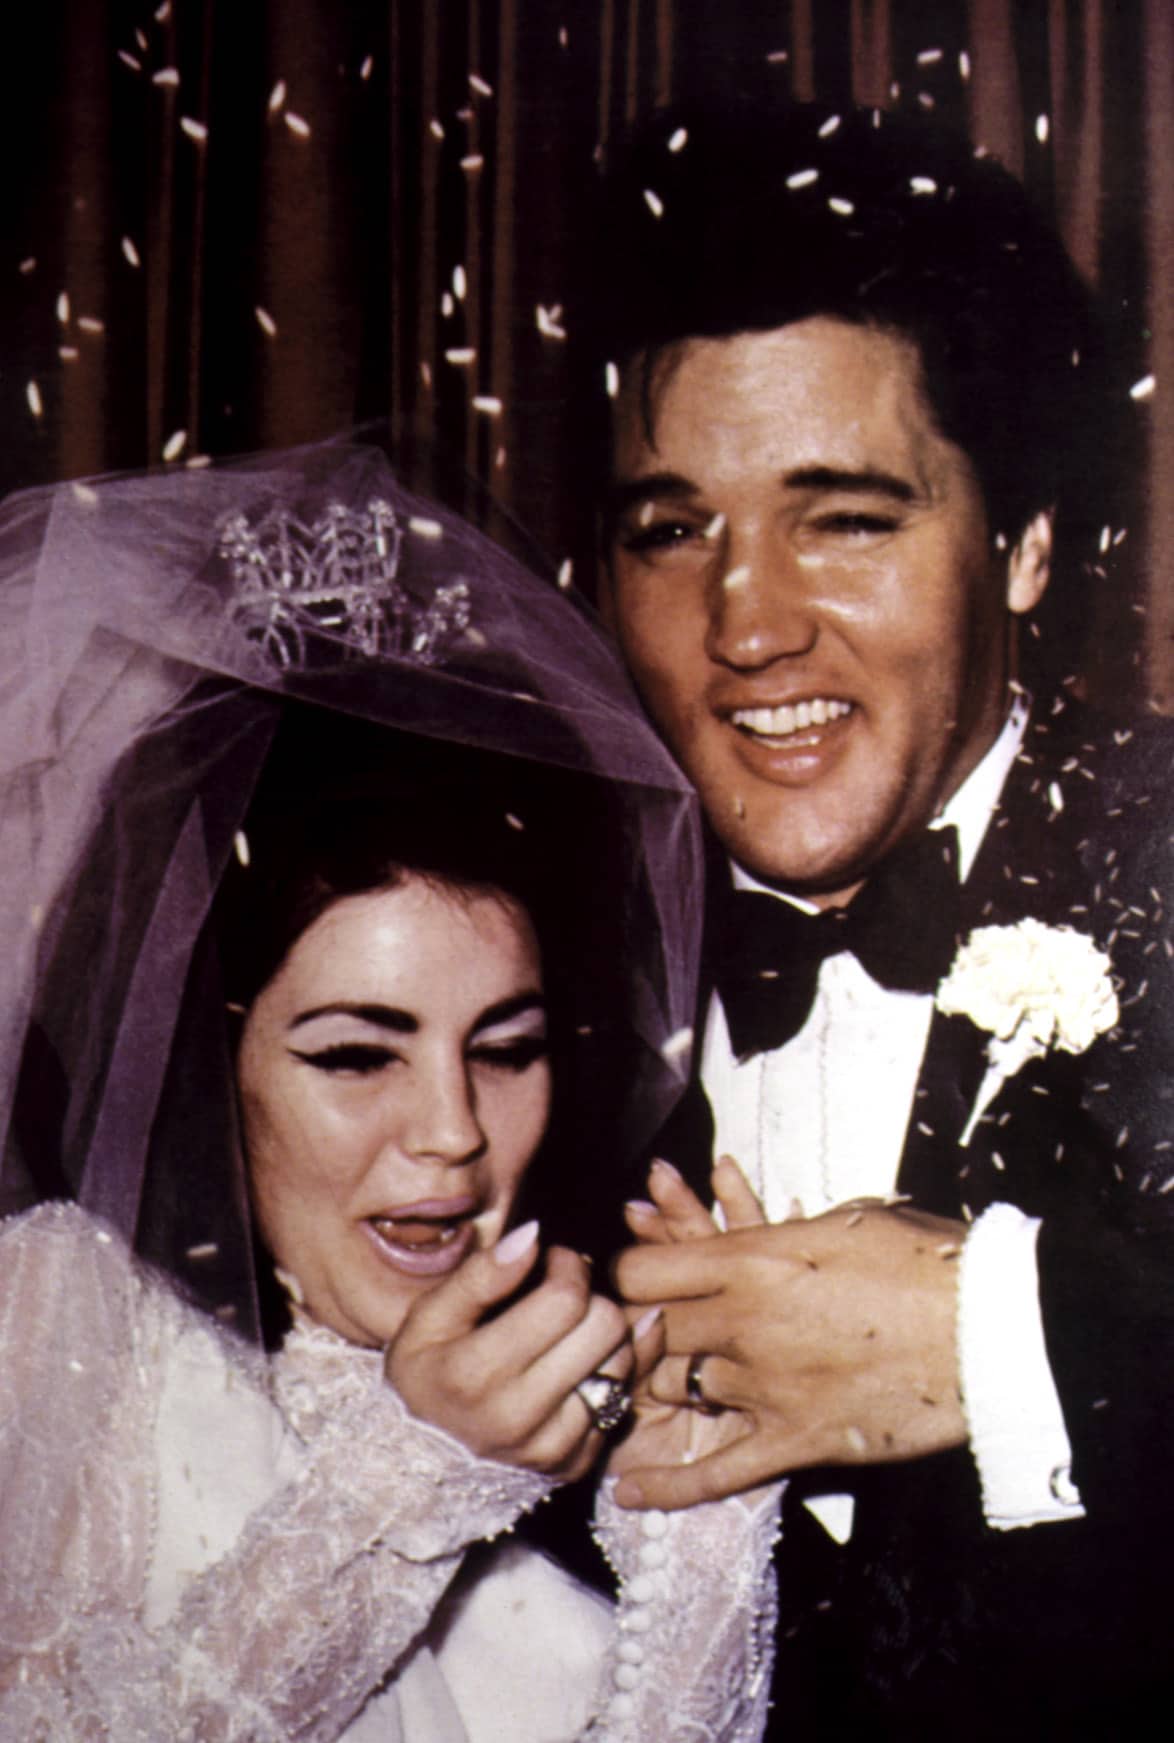 Newlyweds PRISCILLA PRESLEY and ELVIS PRESLEY get pelted with rice, 1967